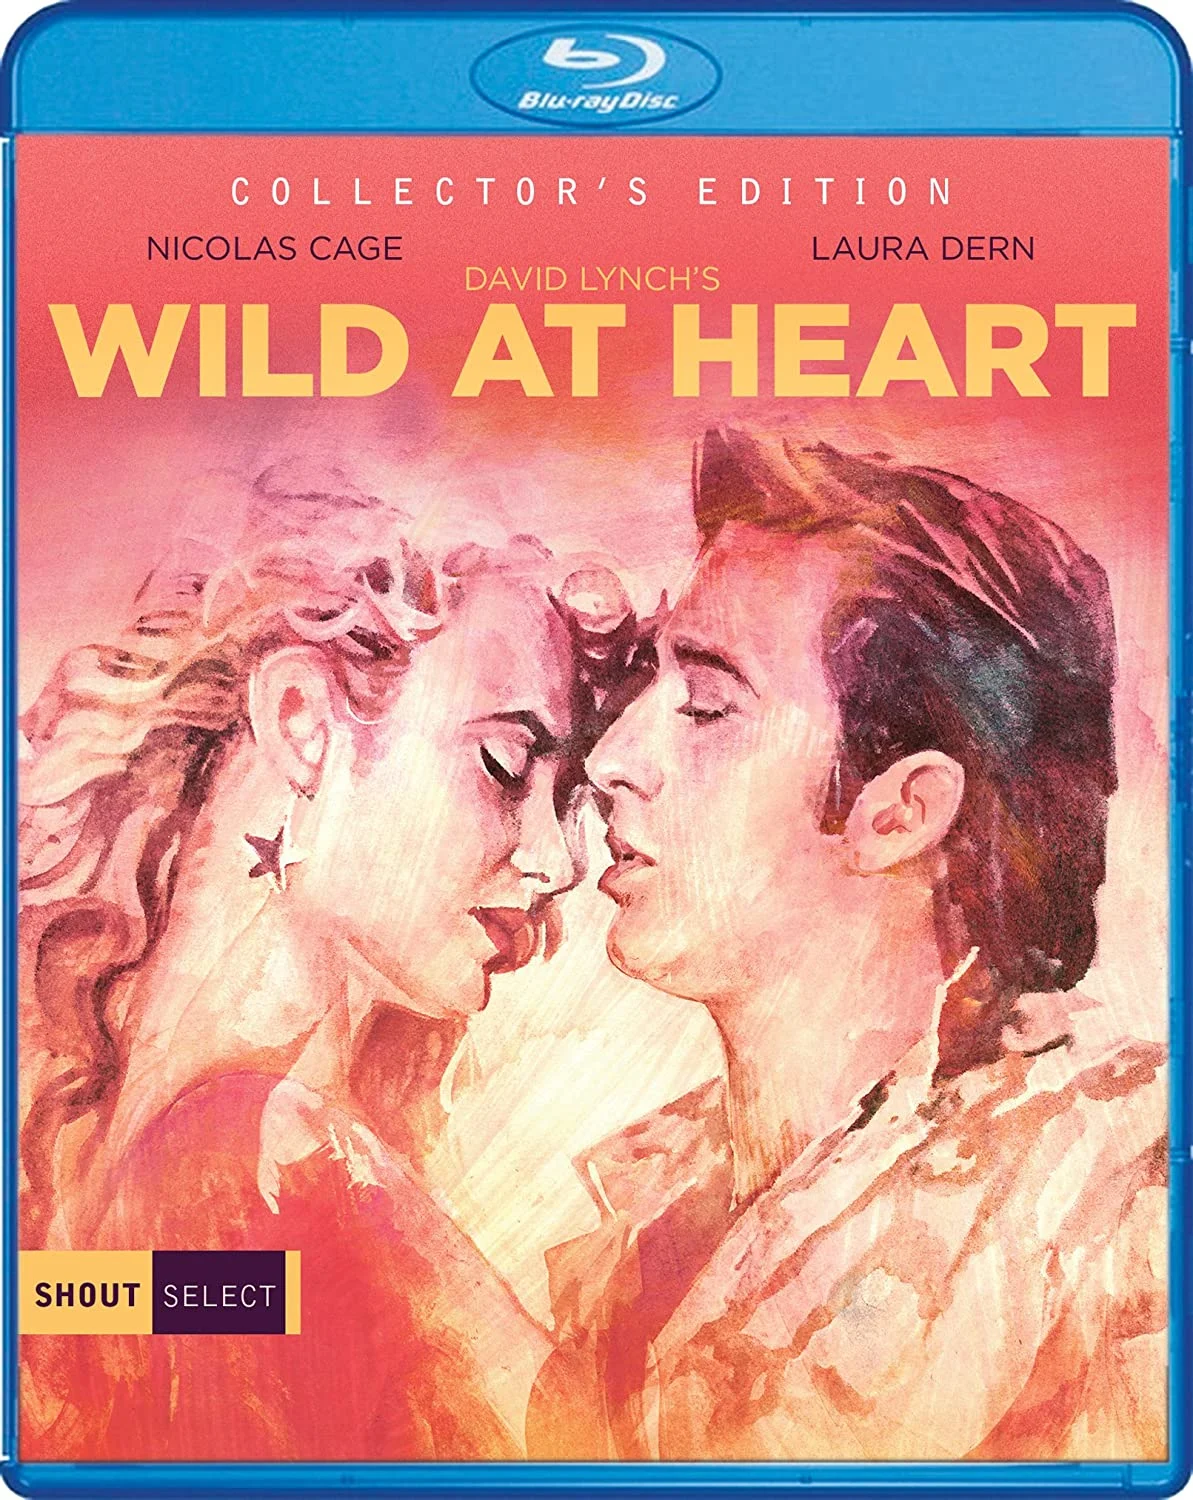 Wild at Heart: Collector’s Edition (Blu-ray) on MovieShack